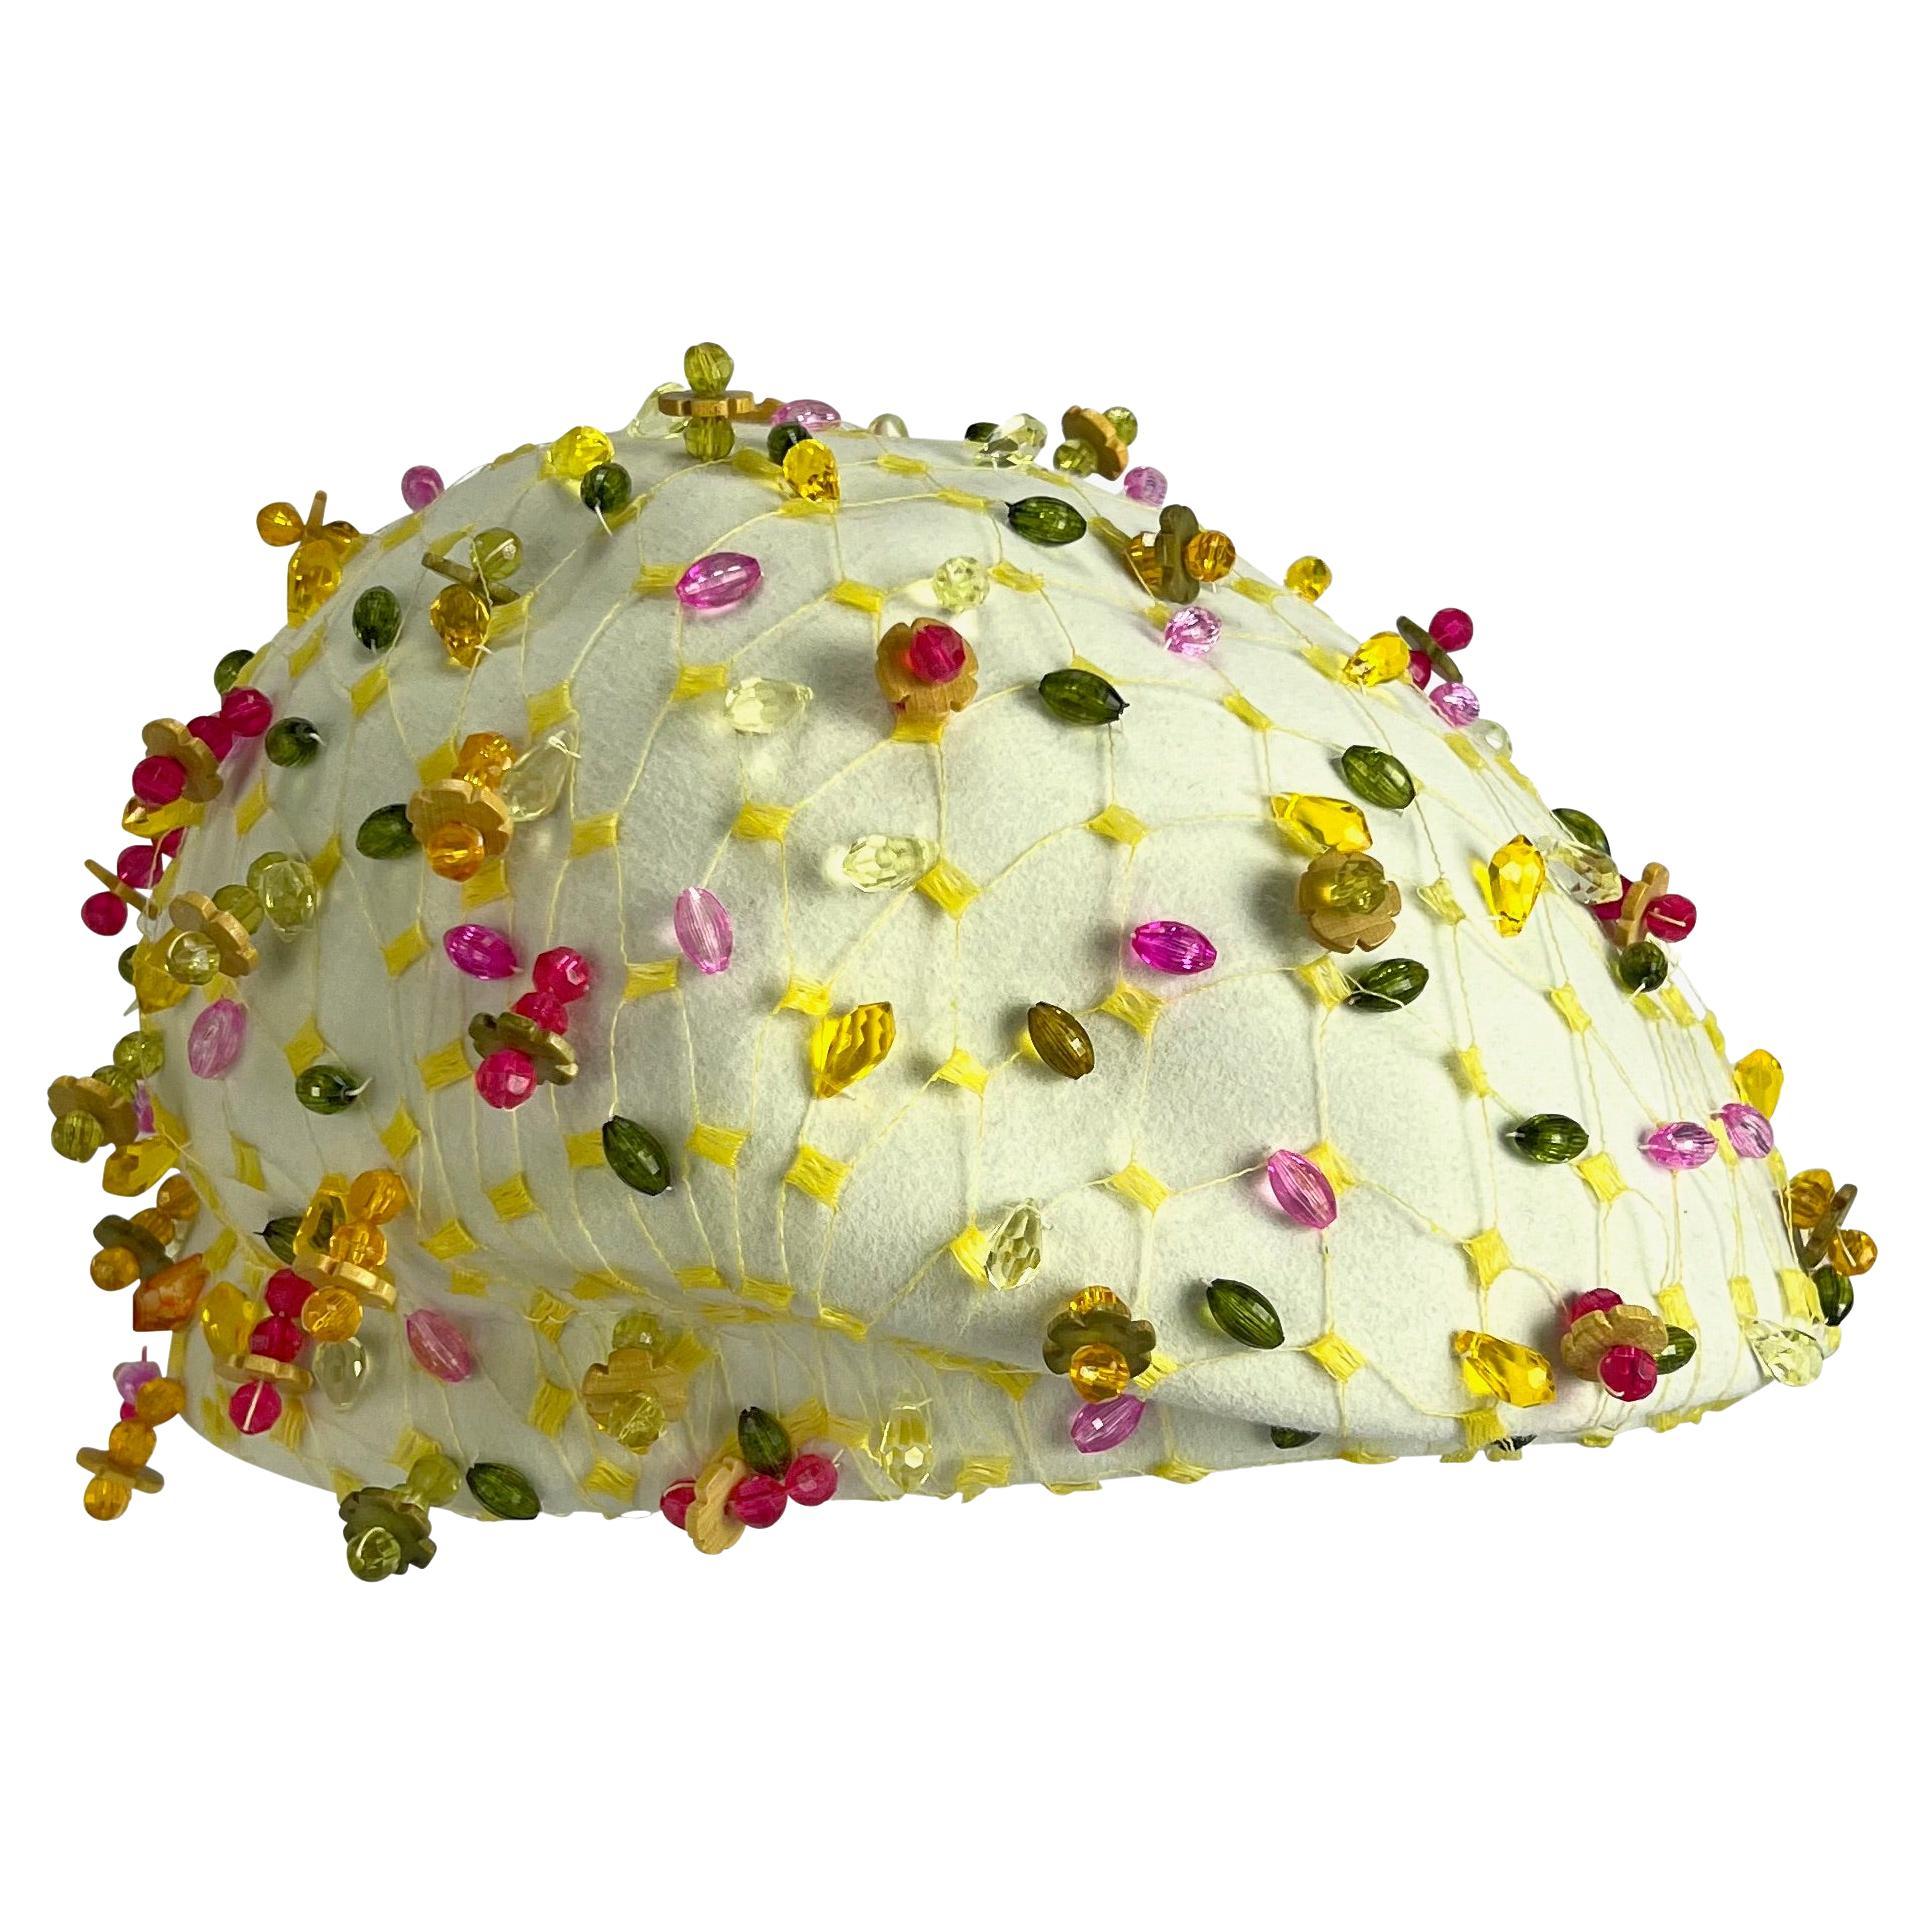 Presenting a fabulous off-white vintage Christian Dior webbed and beaded hat. From the 1960s, this hat is covered in a vibrant yellow net and is embellished with a variety of beautiful multicolor beads. 

Approximate Measurements: 
Height: